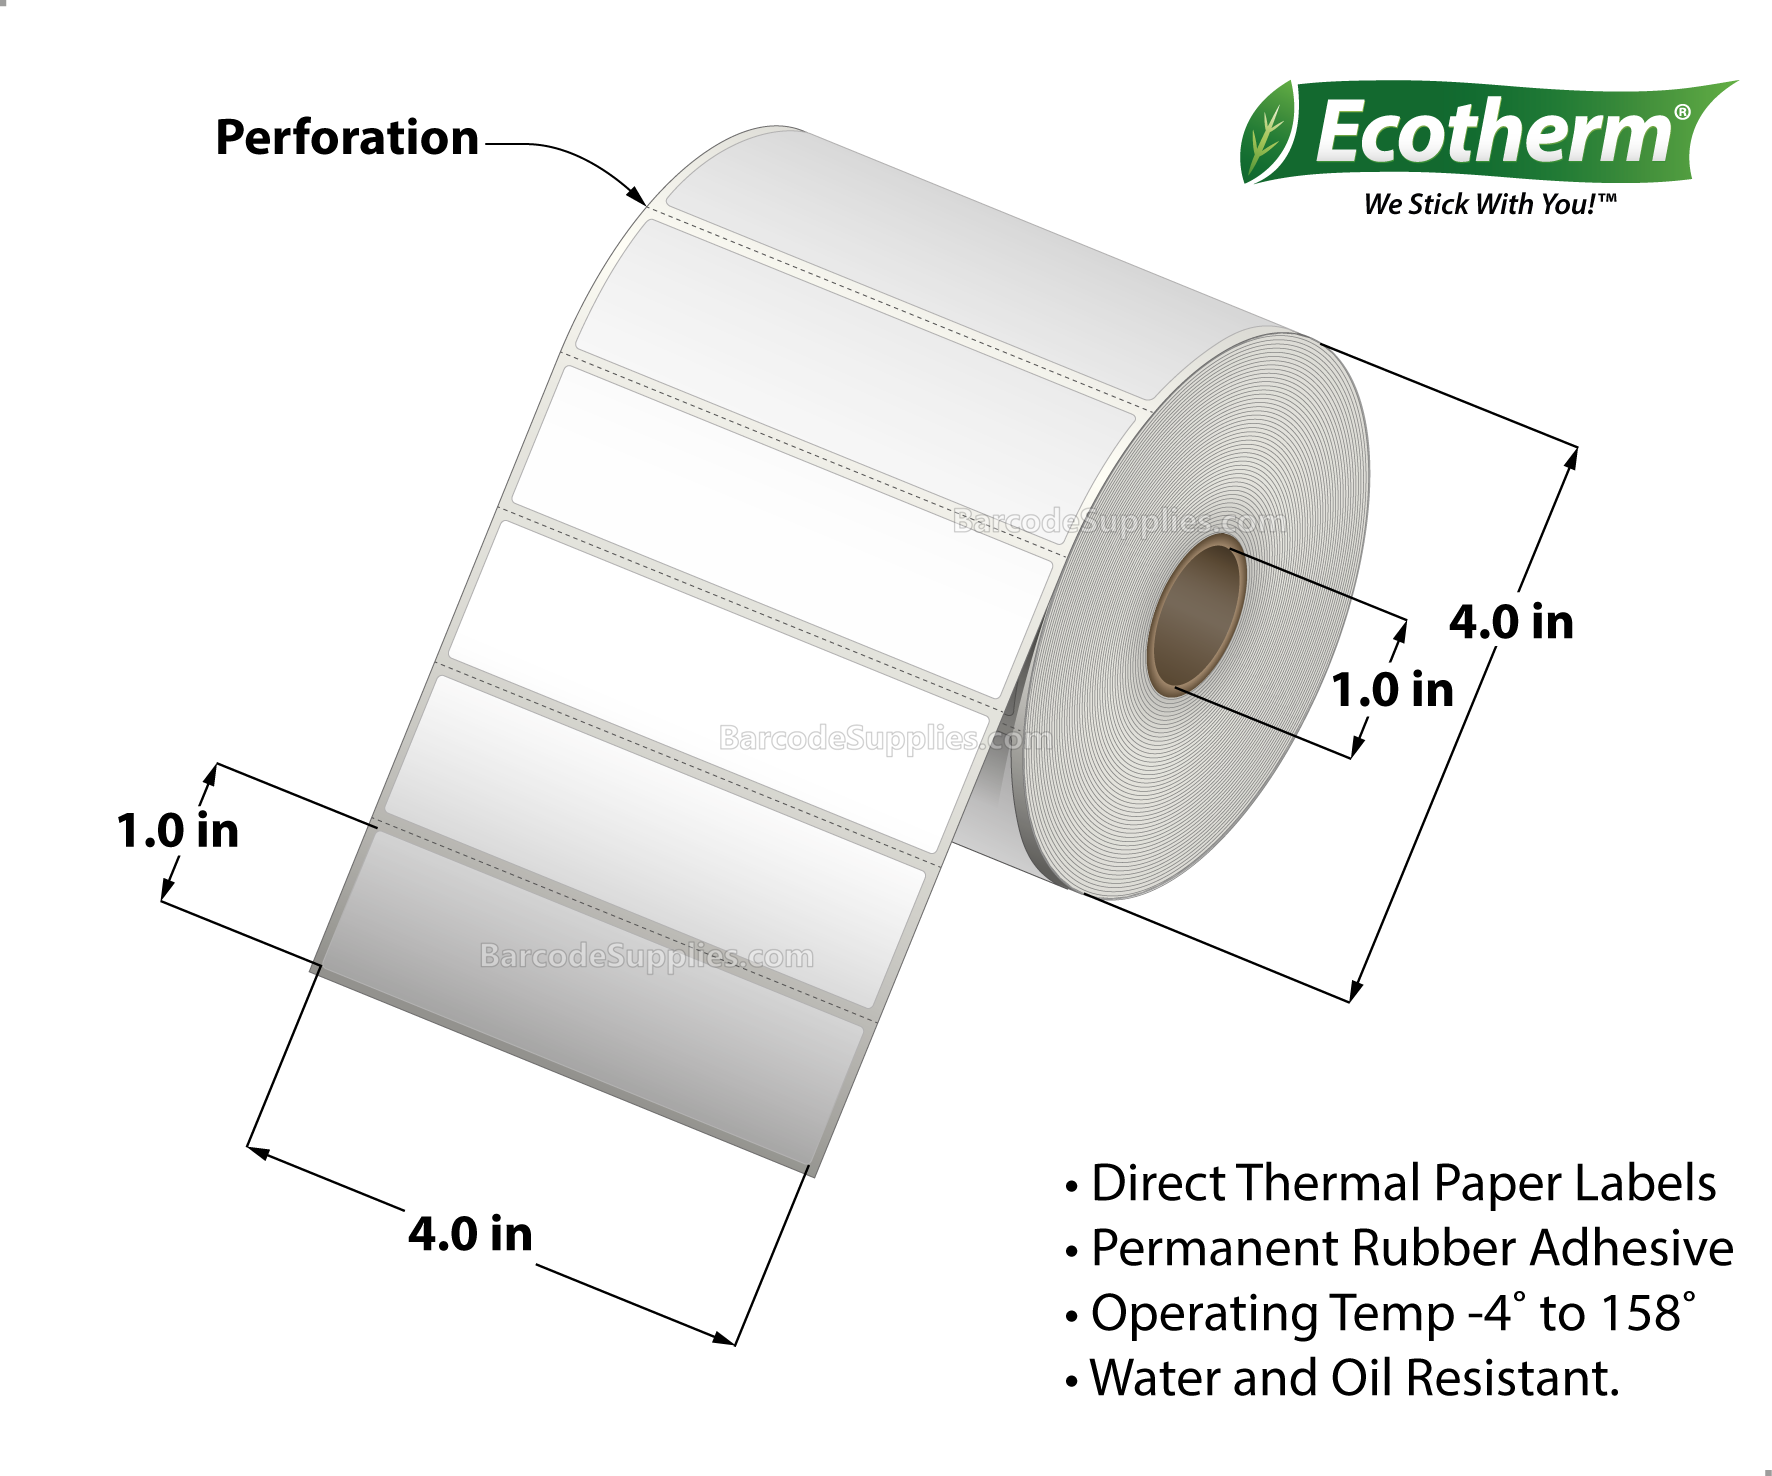 4 x 1 Direct Thermal White Labels With Rubber Adhesive - Perforated - 1340 Labels Per Roll - Carton Of 4 Rolls - 5360 Labels Total - MPN: ECOTHERM14125-4